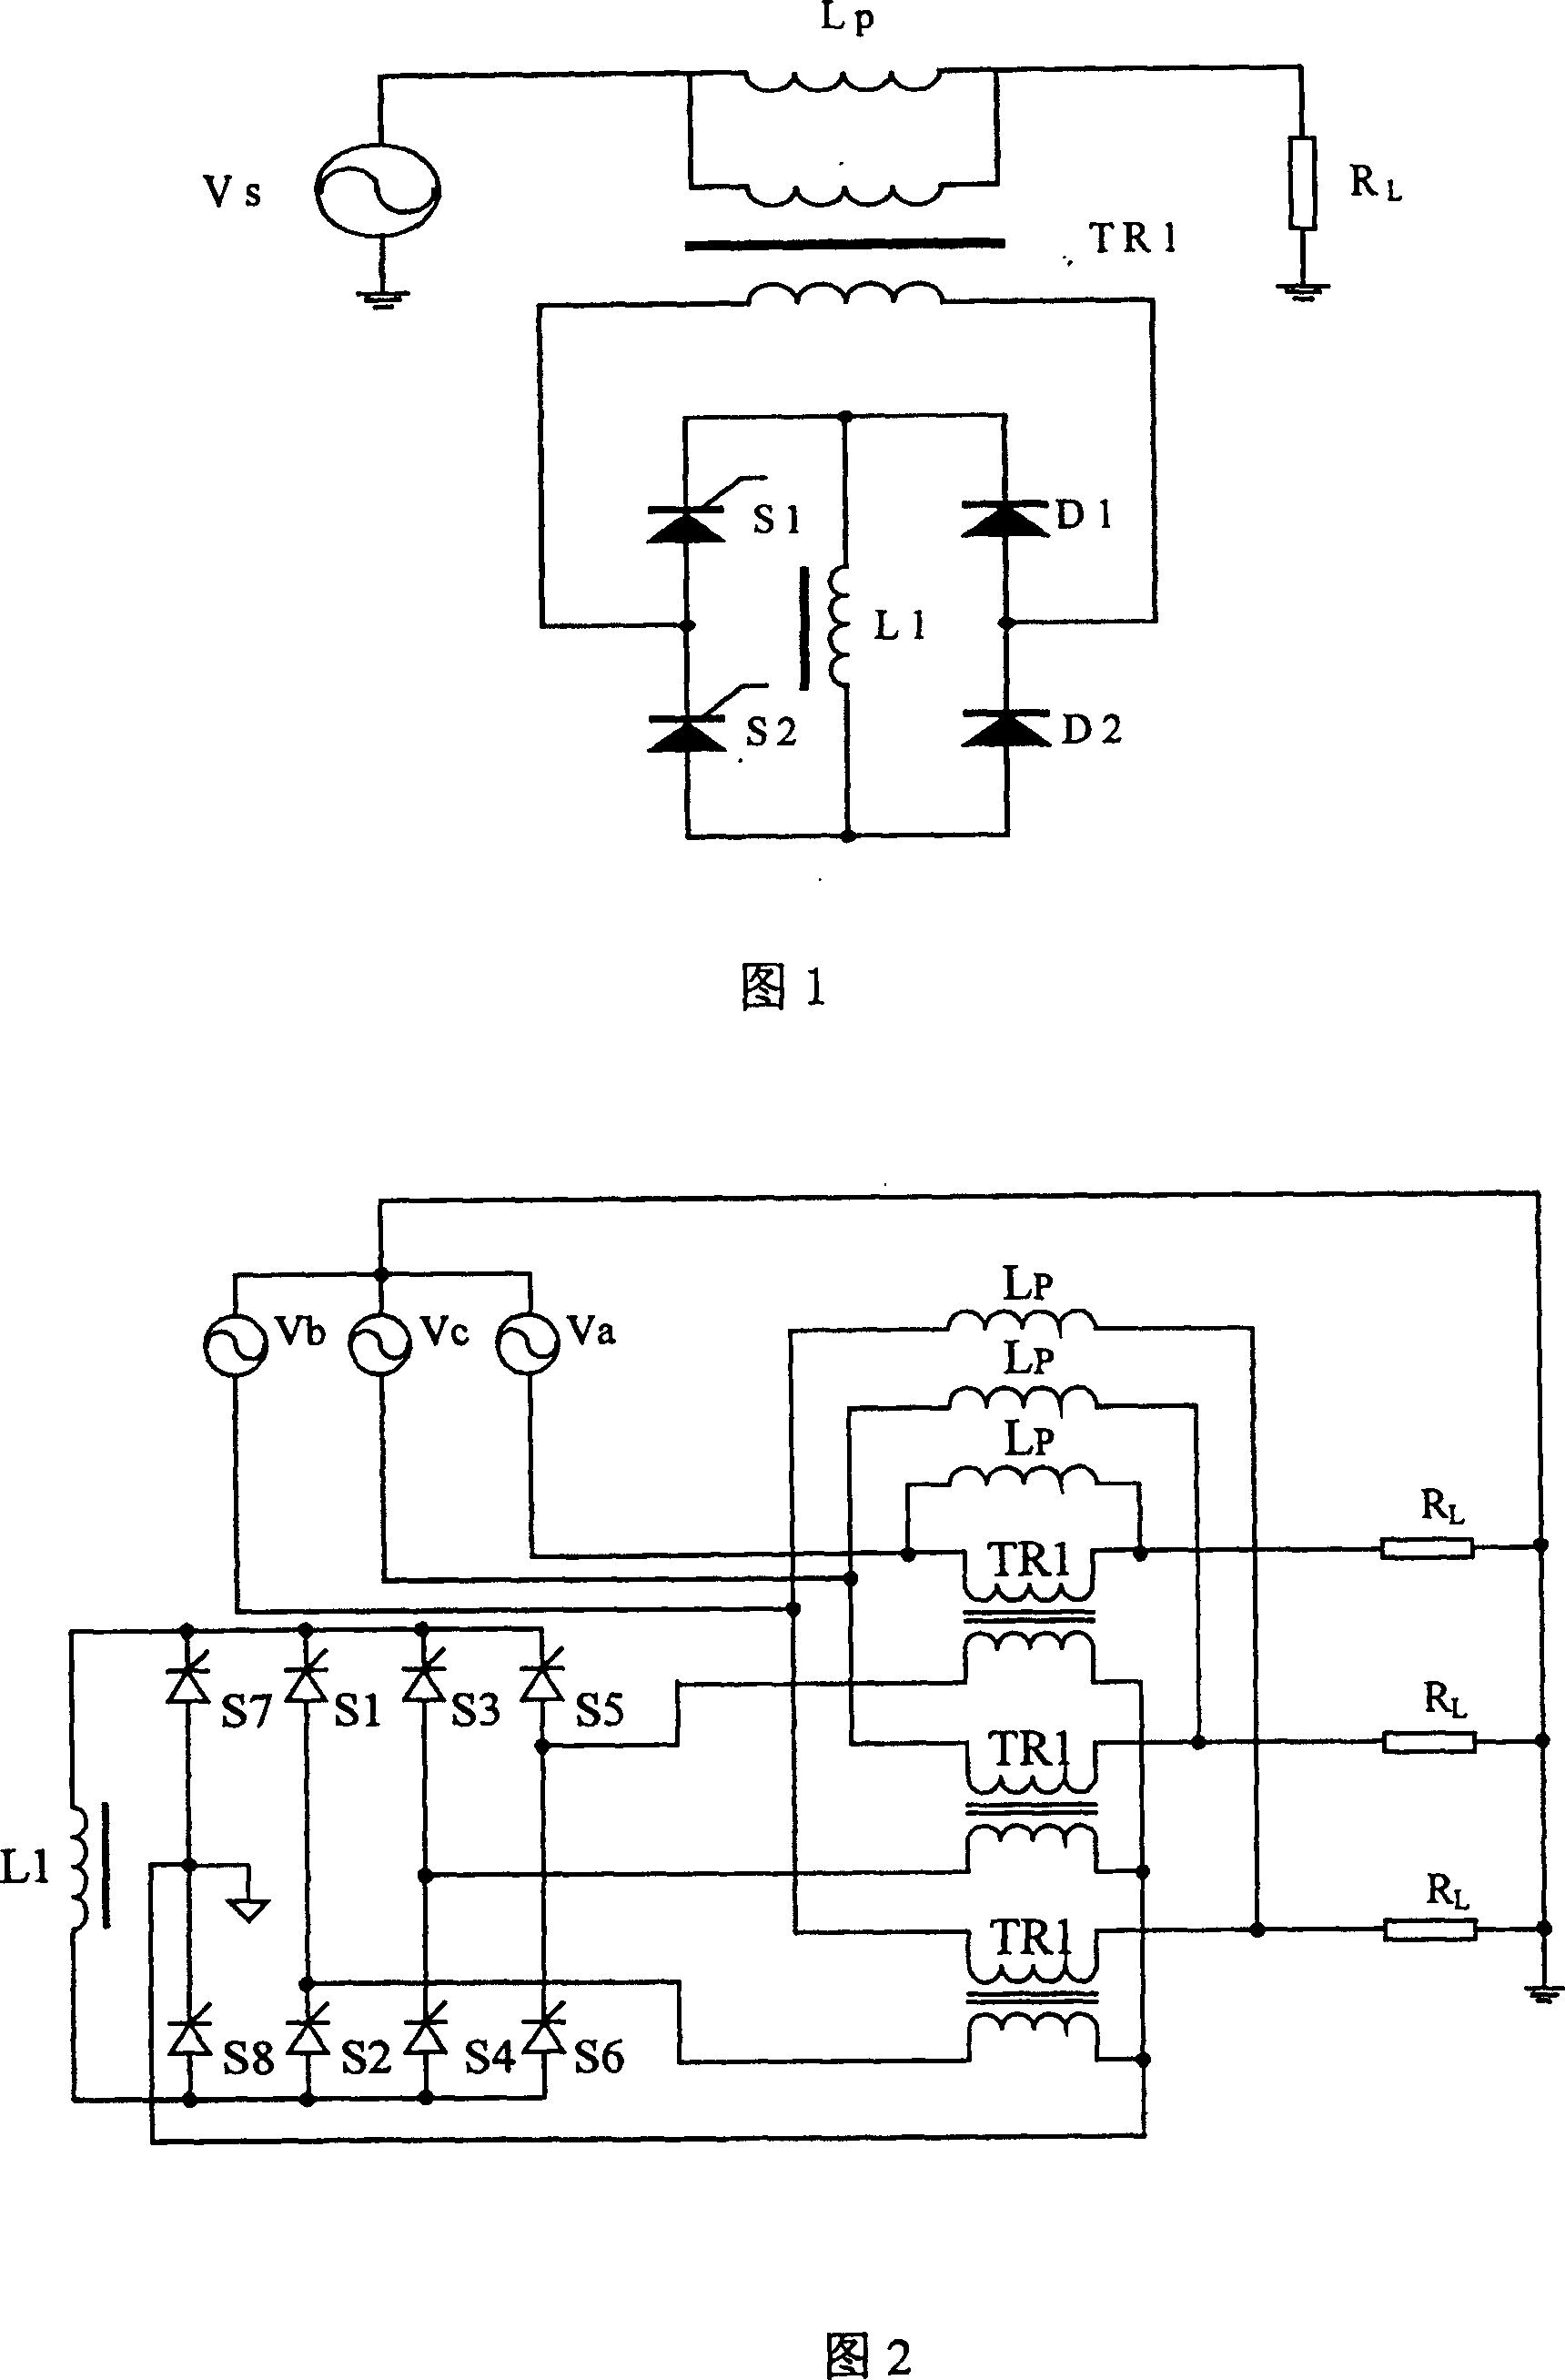 A power electronic type short-circuit fault current limiter